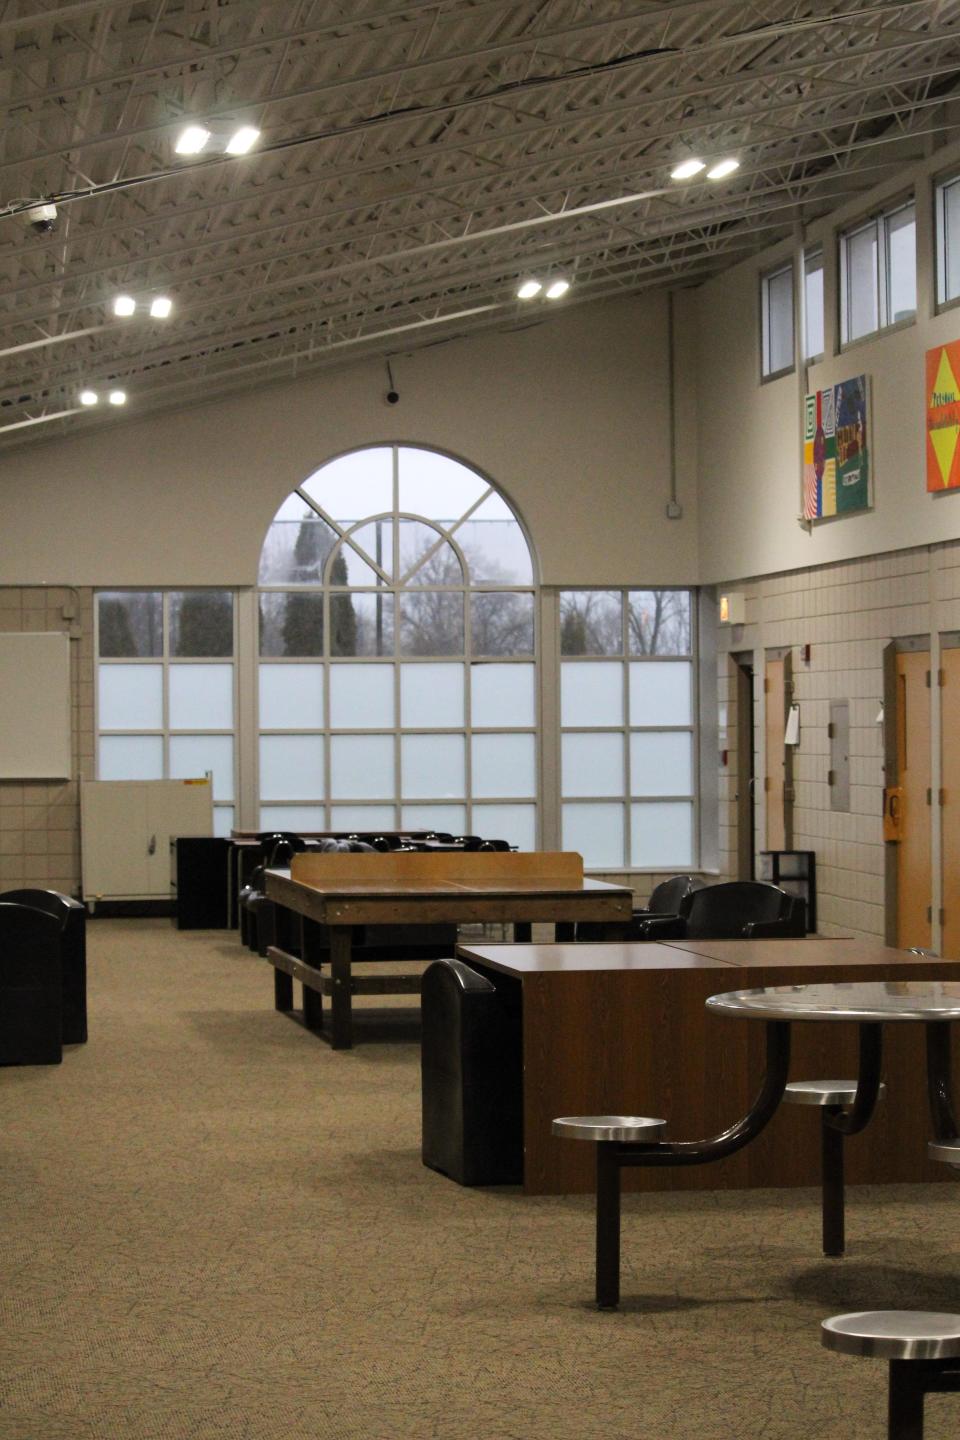 The Day Room is the common area for the youth at NCORC. Along the walls are the doors to their rooms. In January, the North Central Ohio Rehabilitation Center had 14 youth in the facility, with a maximum of 20 full beds at one time.